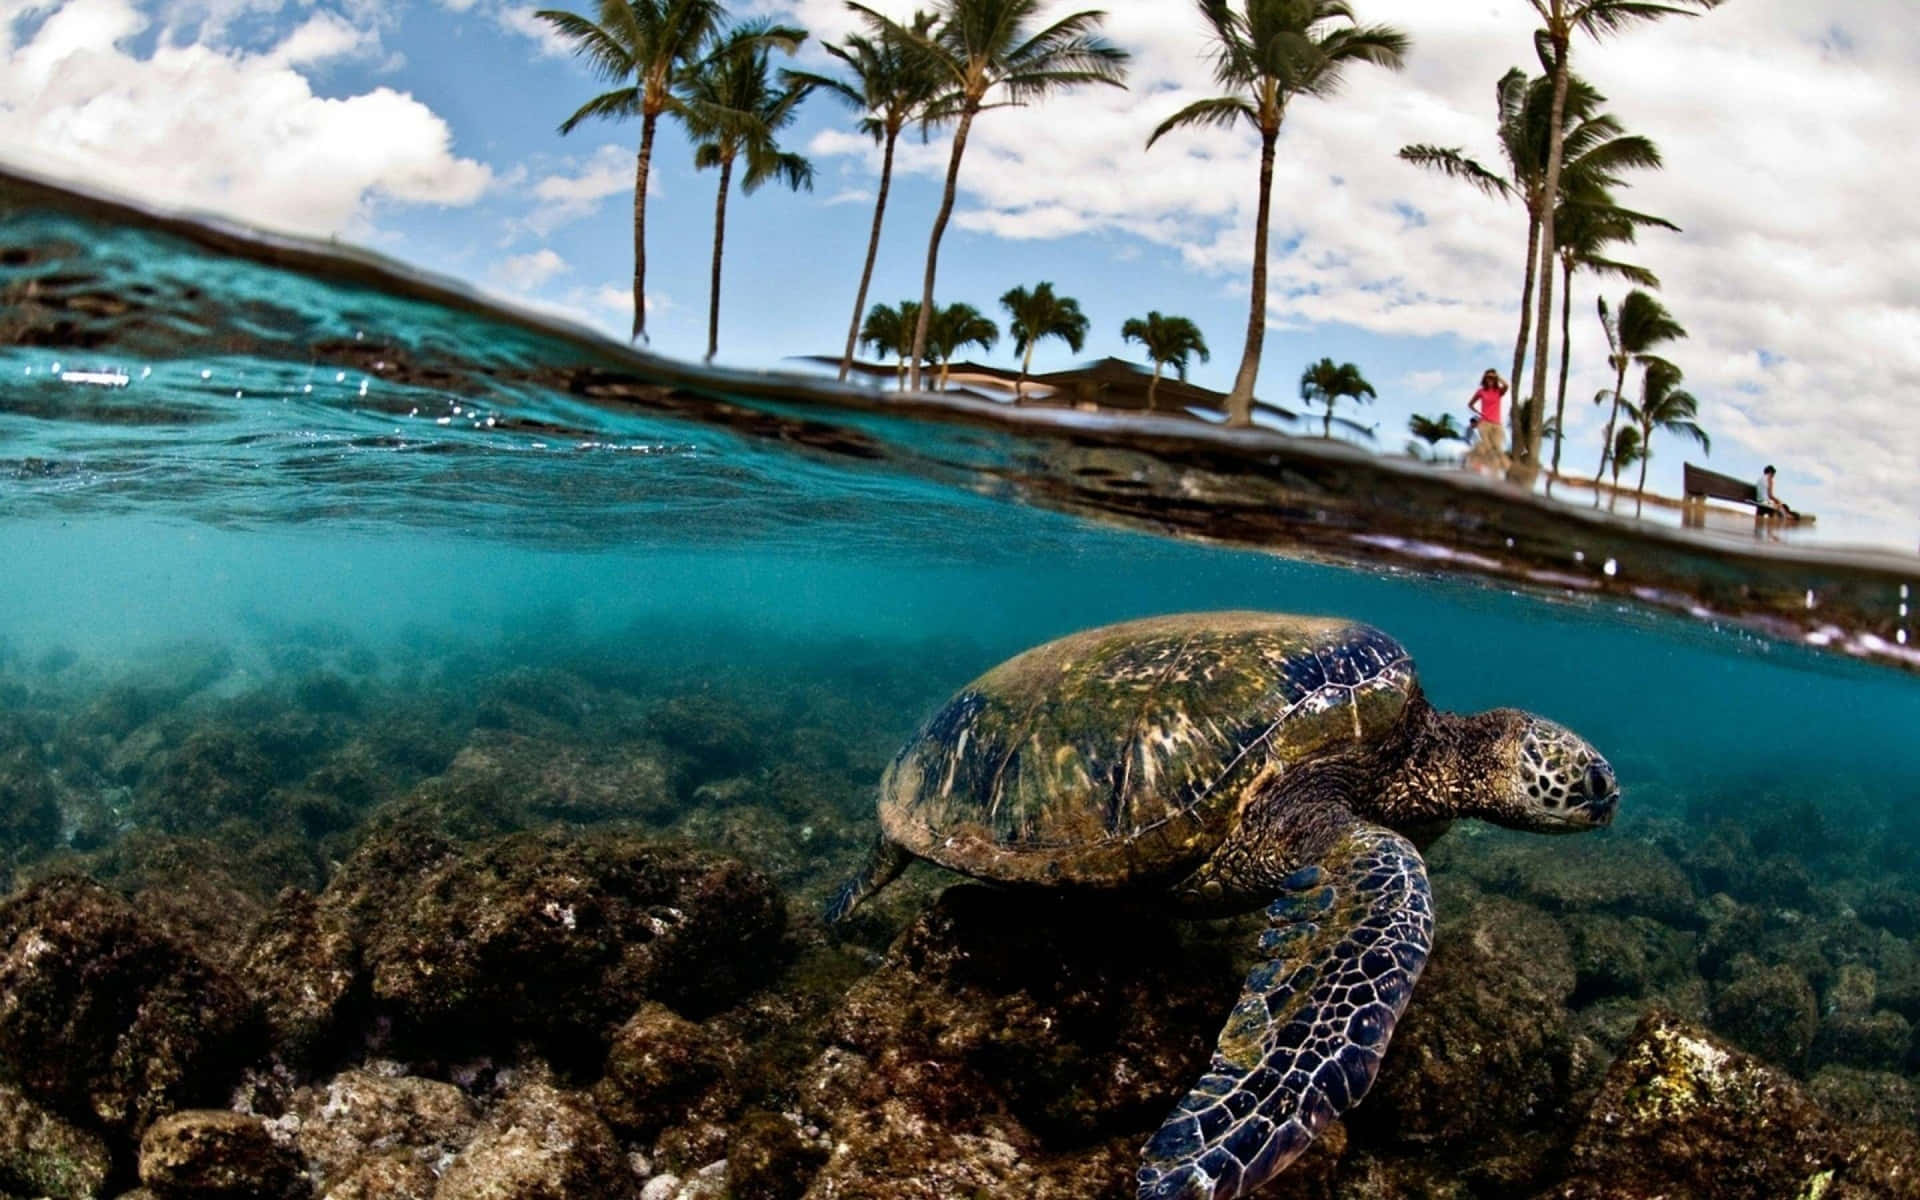 a turtle swimming in the ocean near palm trees